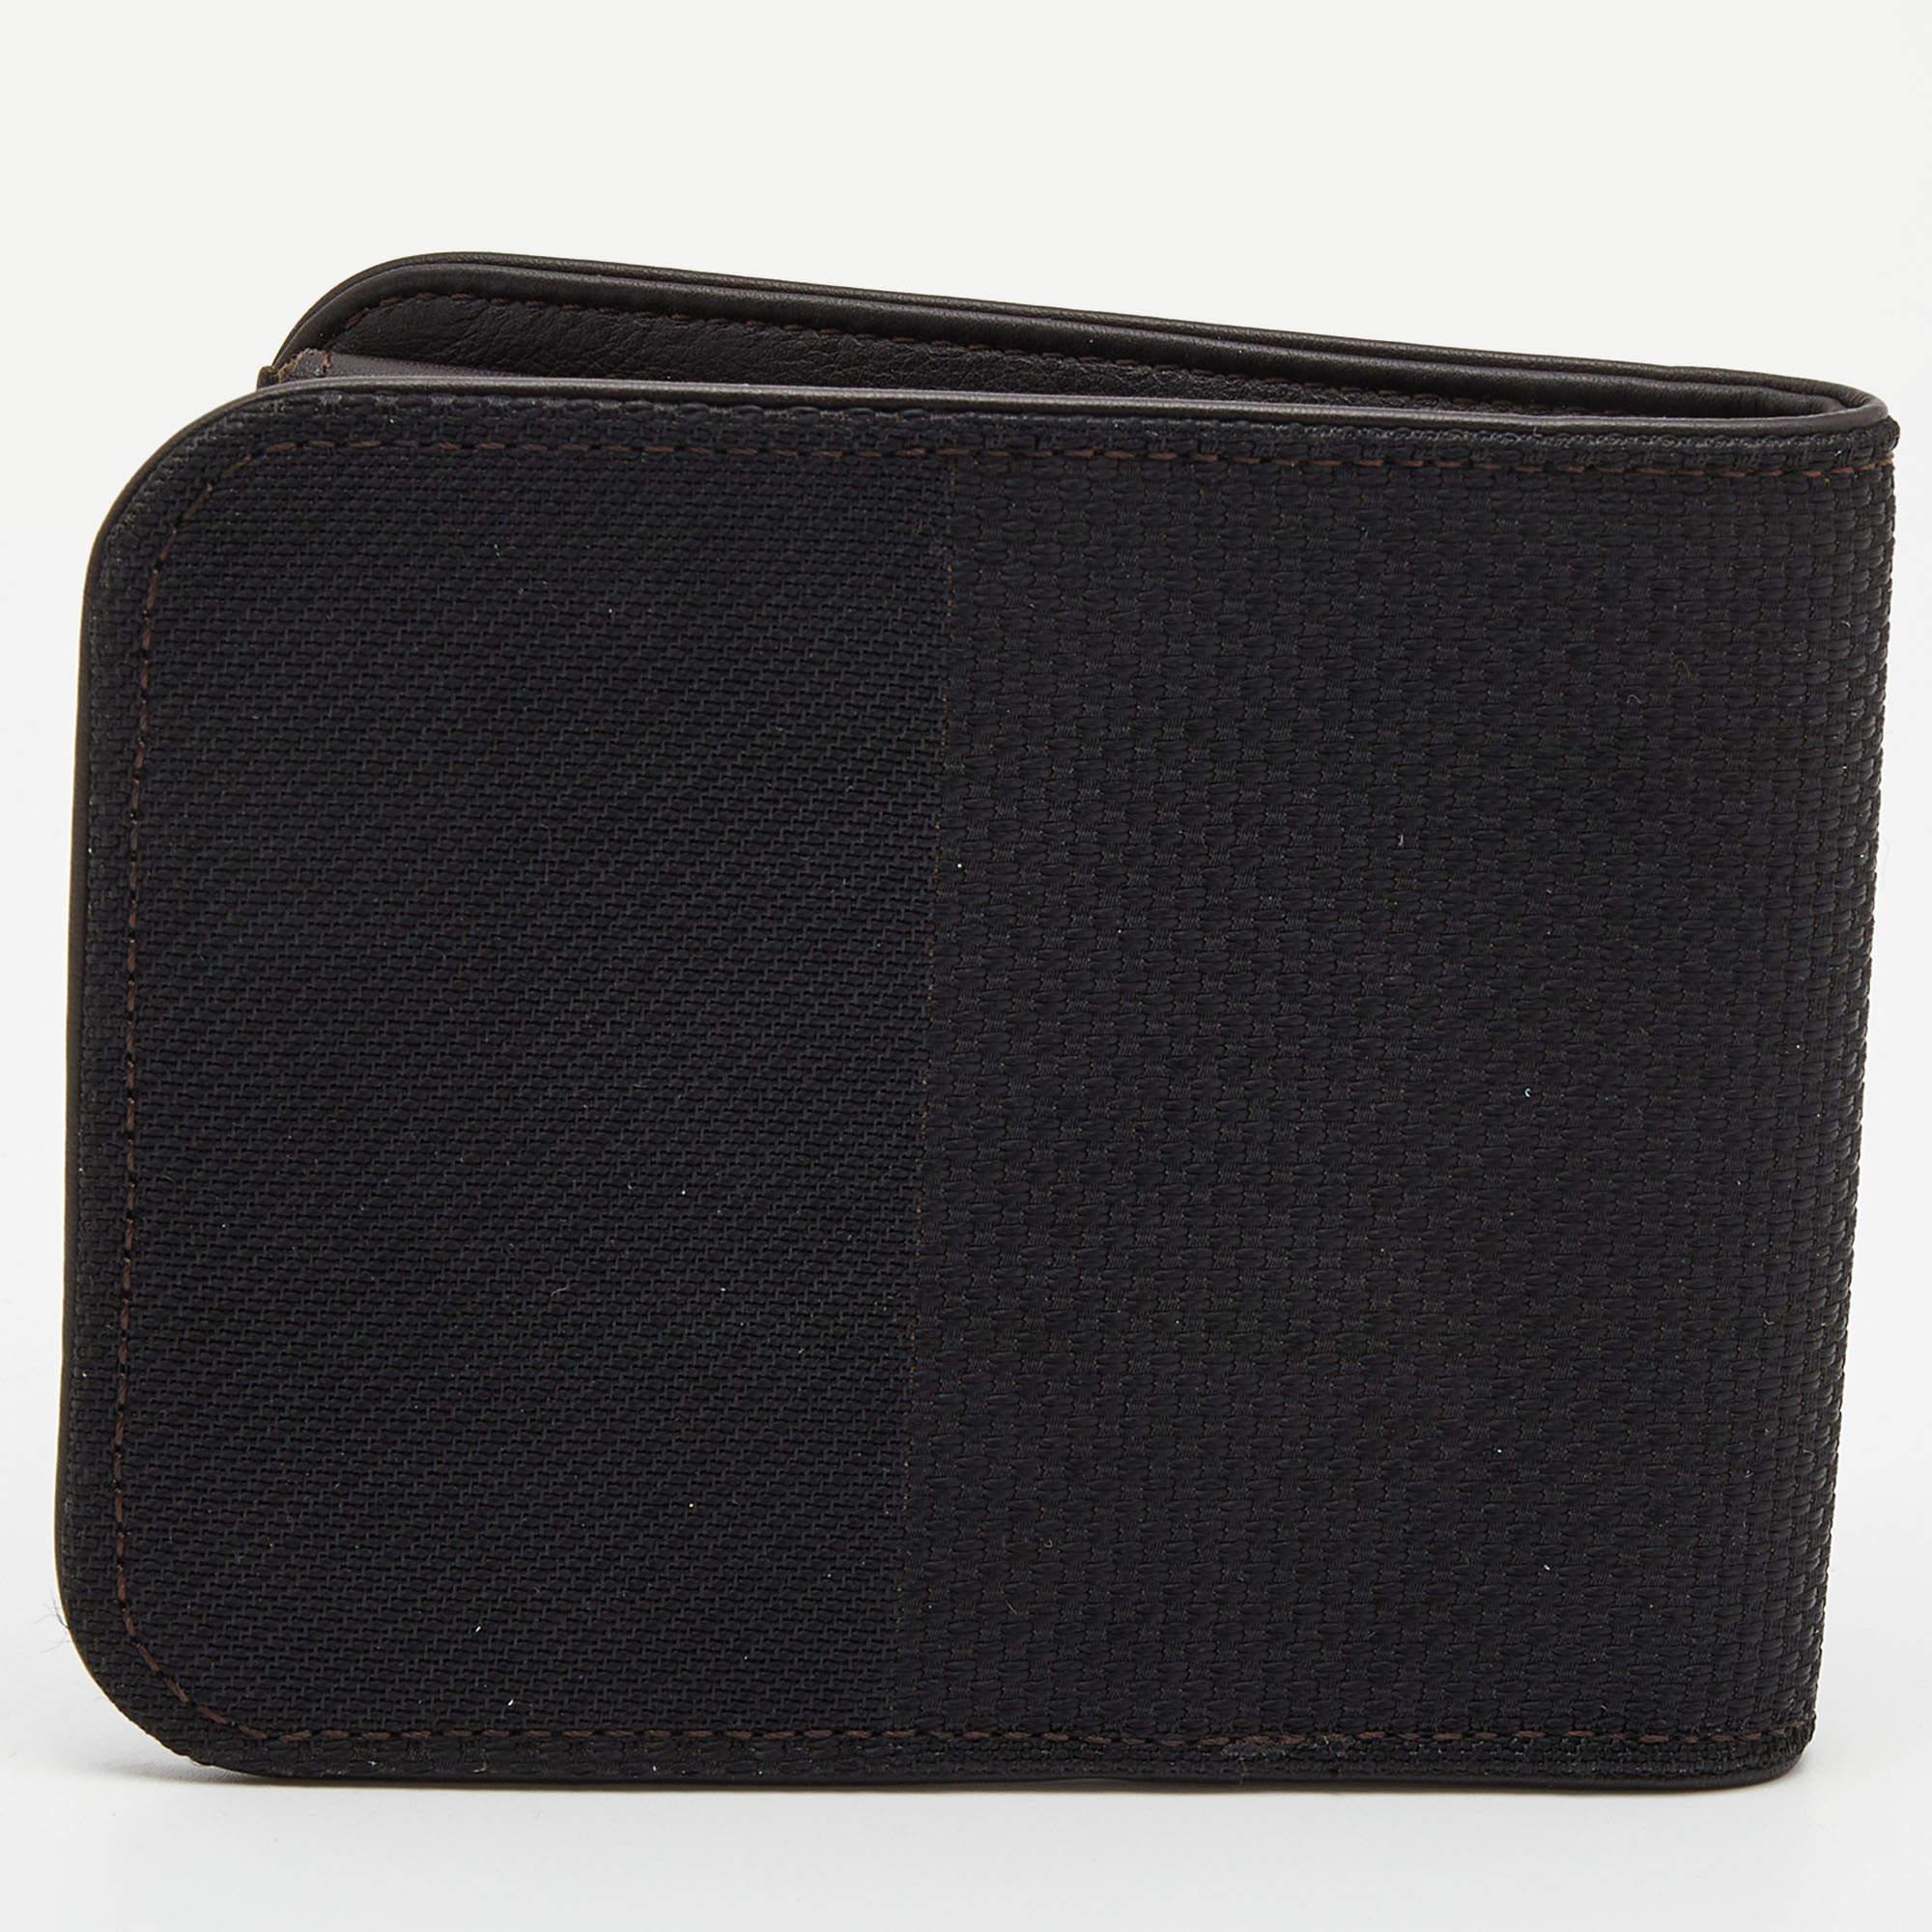 This authentic Louis Vuitton wallet for men has a look of luxury. It is crafted from Damier Geant canvas as a bifold and equipped with compartments and multiple slots to neatly house your cards and cash.

